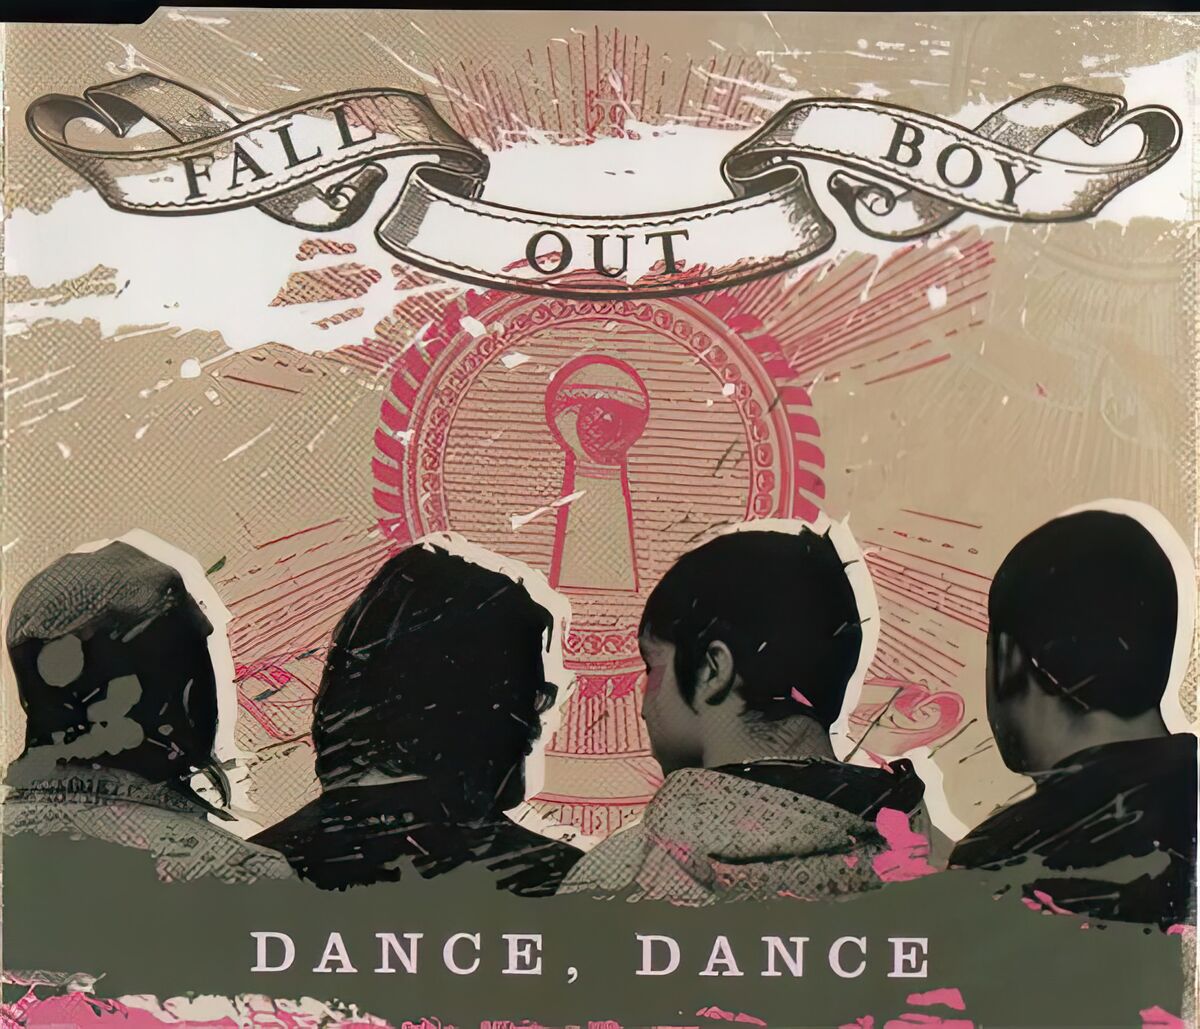 We fall out. Fallout boy Dance Dance. Fall out boy Dance. Группа Fall out boy Dance Dance. Fall out boy album Dance Dance.